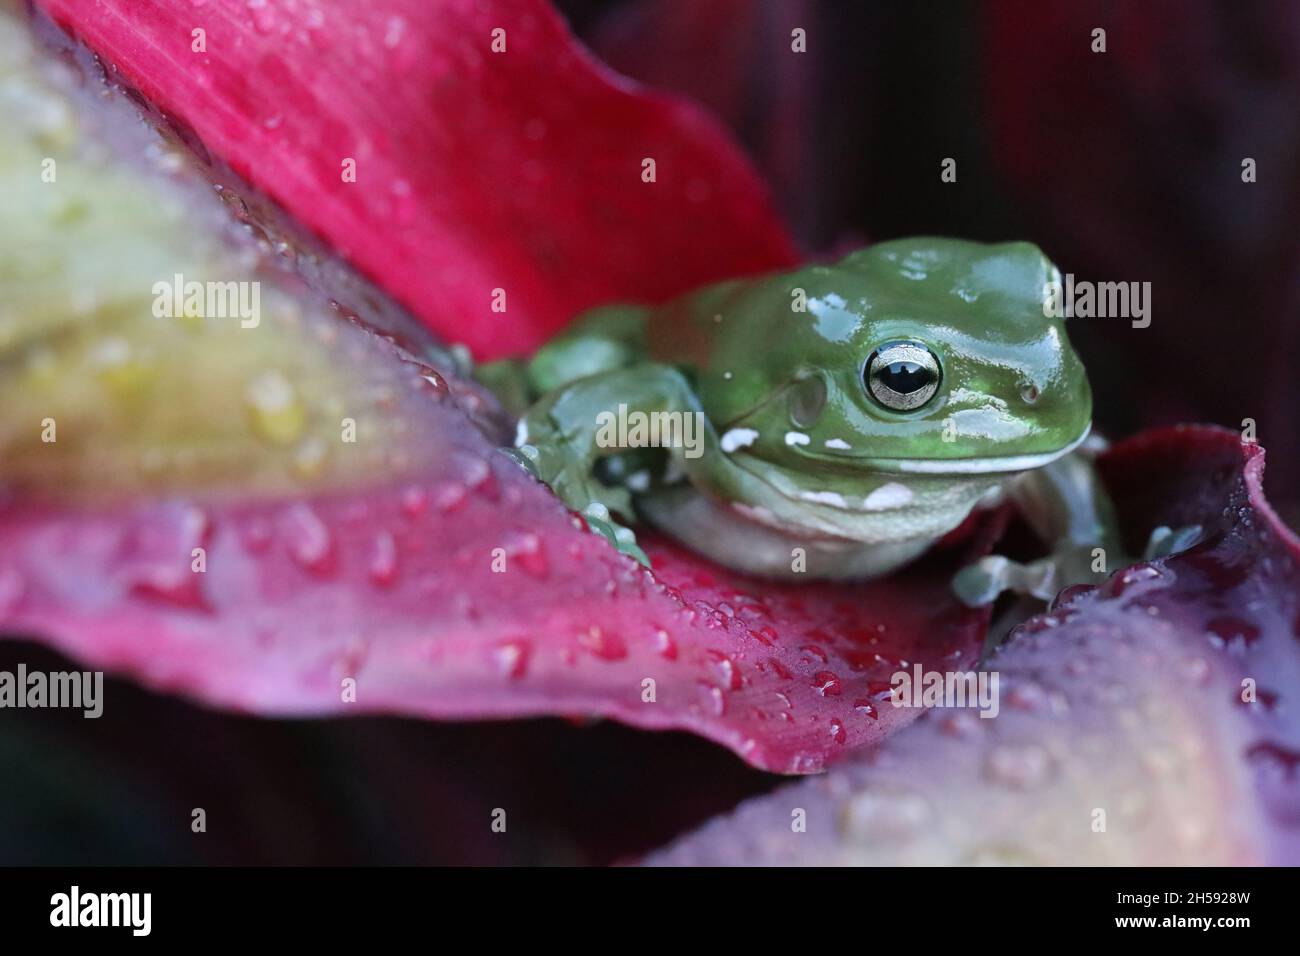 A beautiful big tropical australian green tree frog close up on a wet red cordyline leaf. Stock Photo